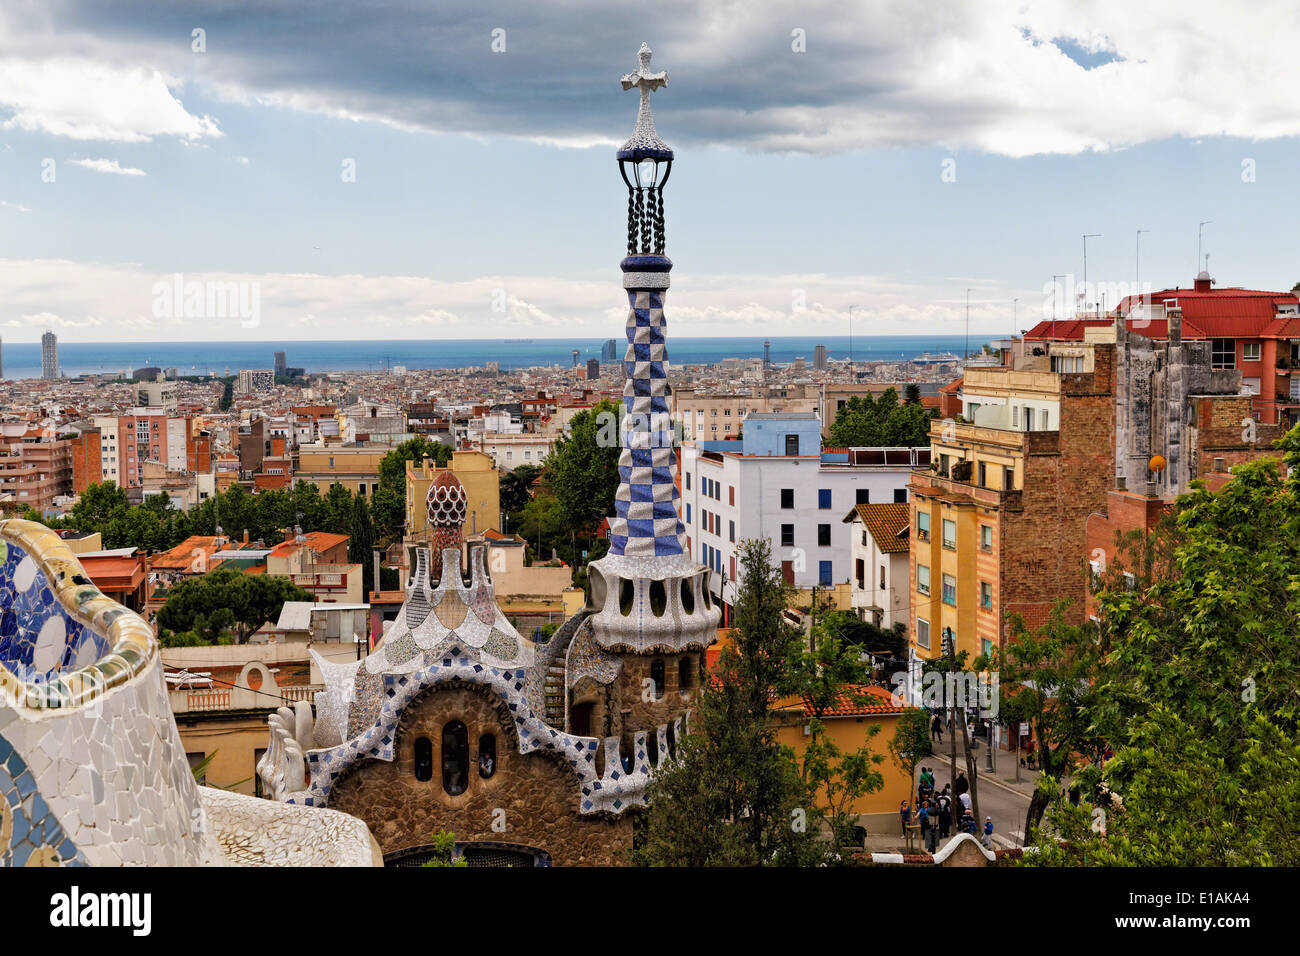 High Angle View of the Gatehouse with White and Blue Tower, Park Guell, Barcelona, Catalonia, Spain Stock Photo